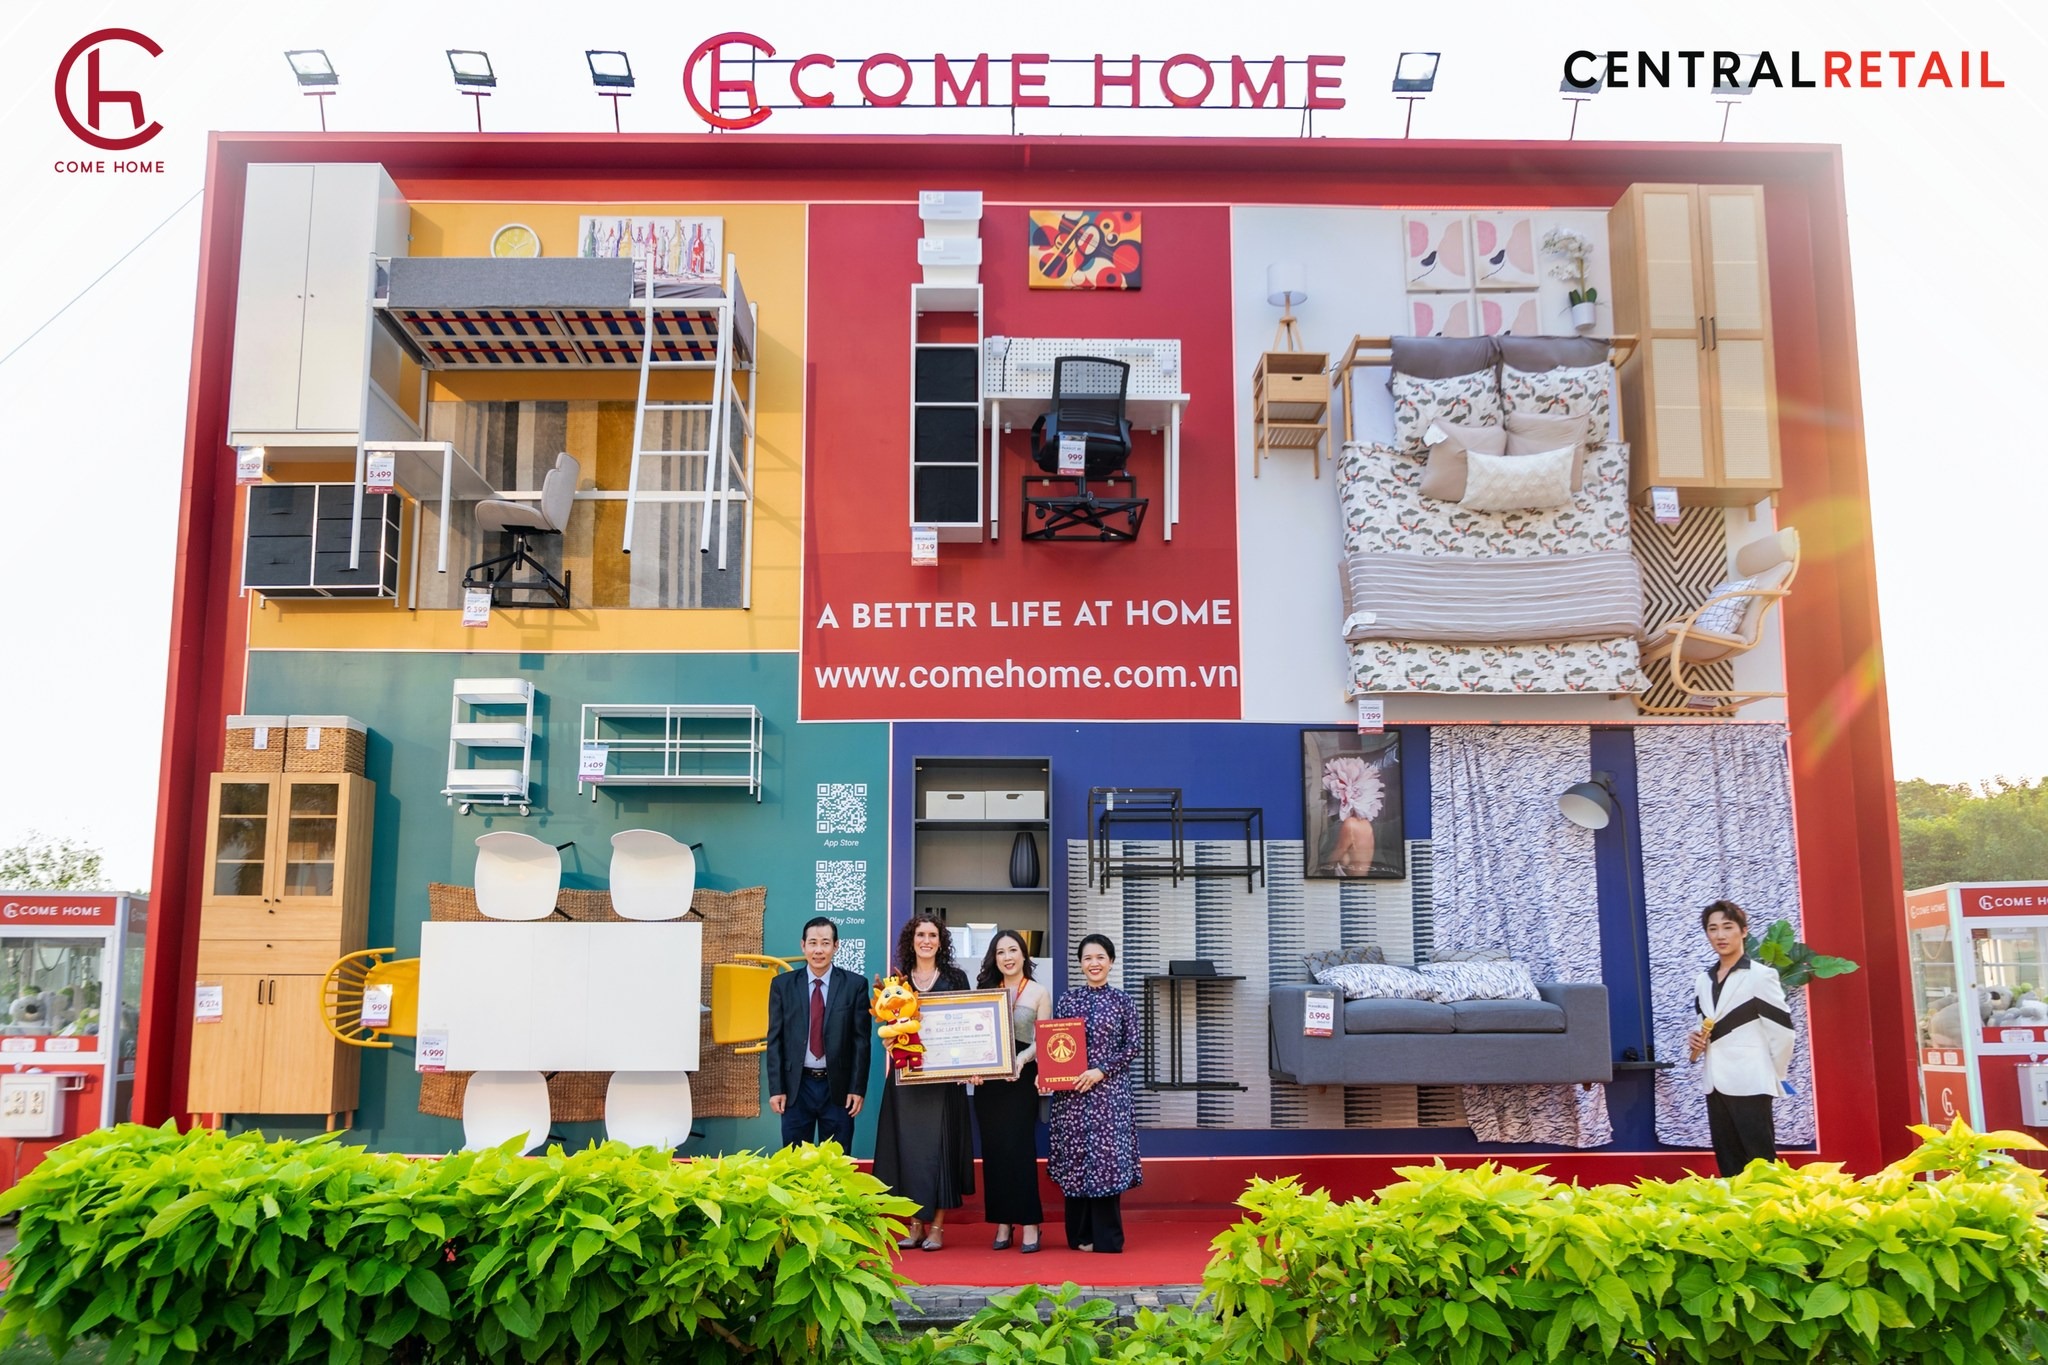 The Come Home wall sets the record for “The Largest Interior Wall in Vietnam”